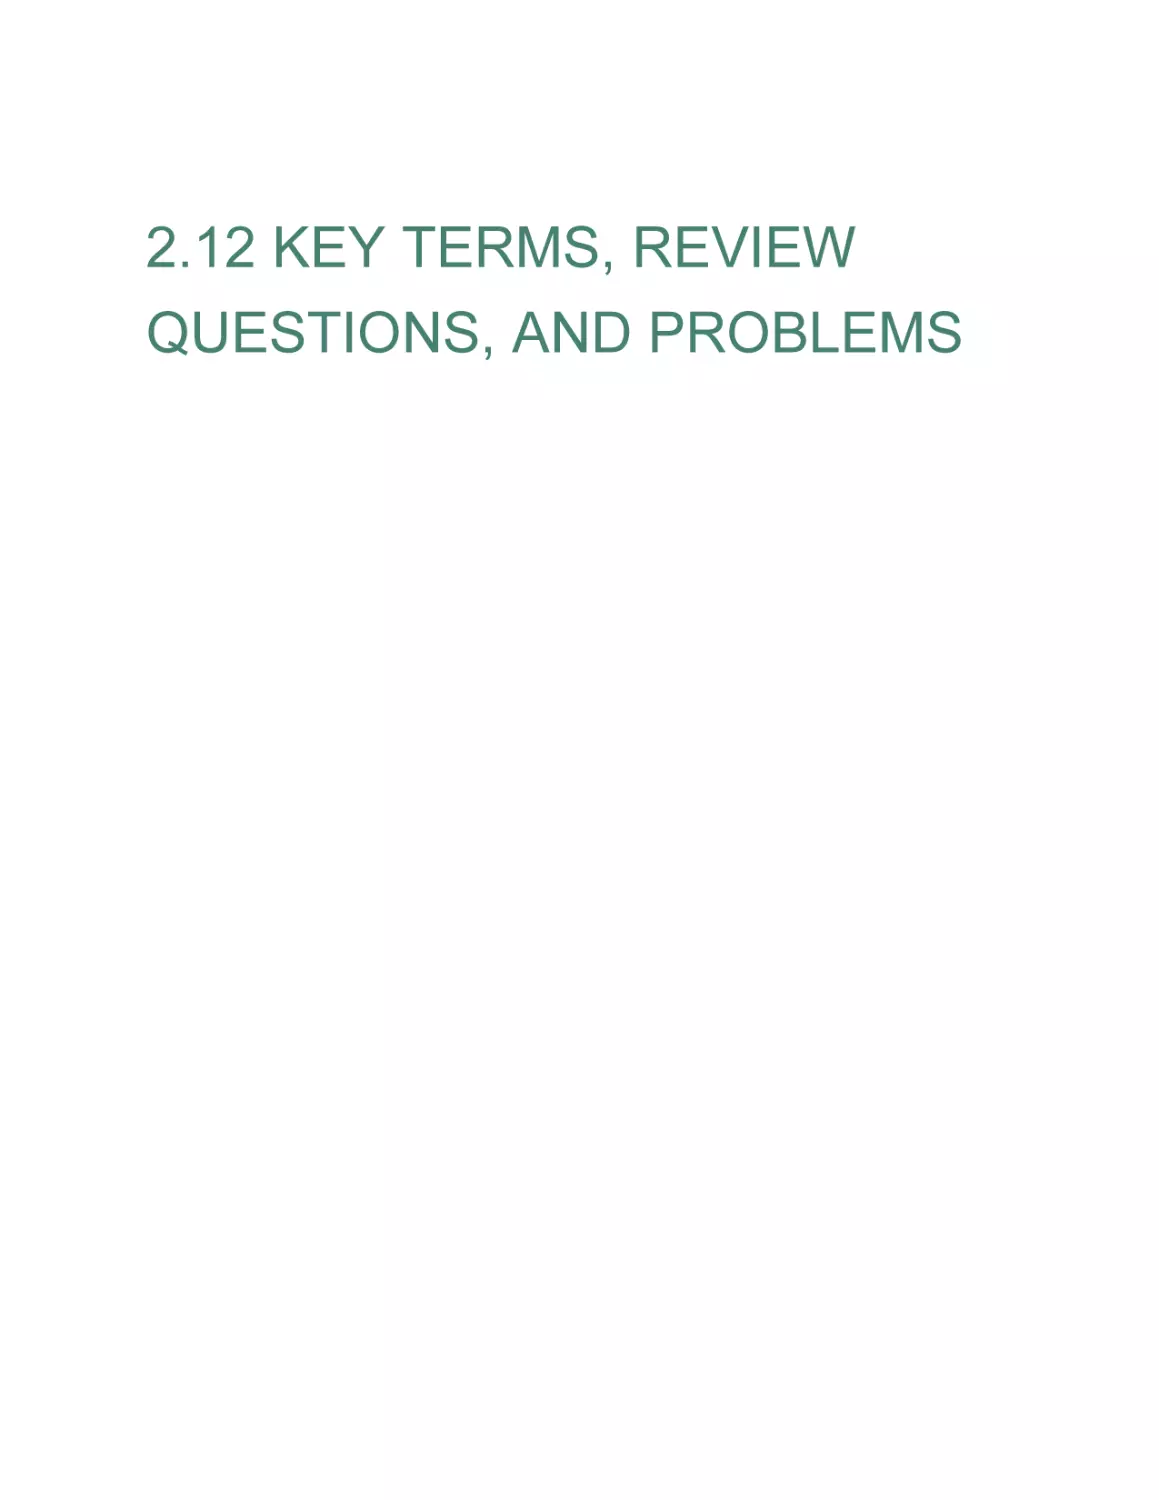 2.12 KEY TERMS, REVIEW QUESTIONS, AND PROBLEMS